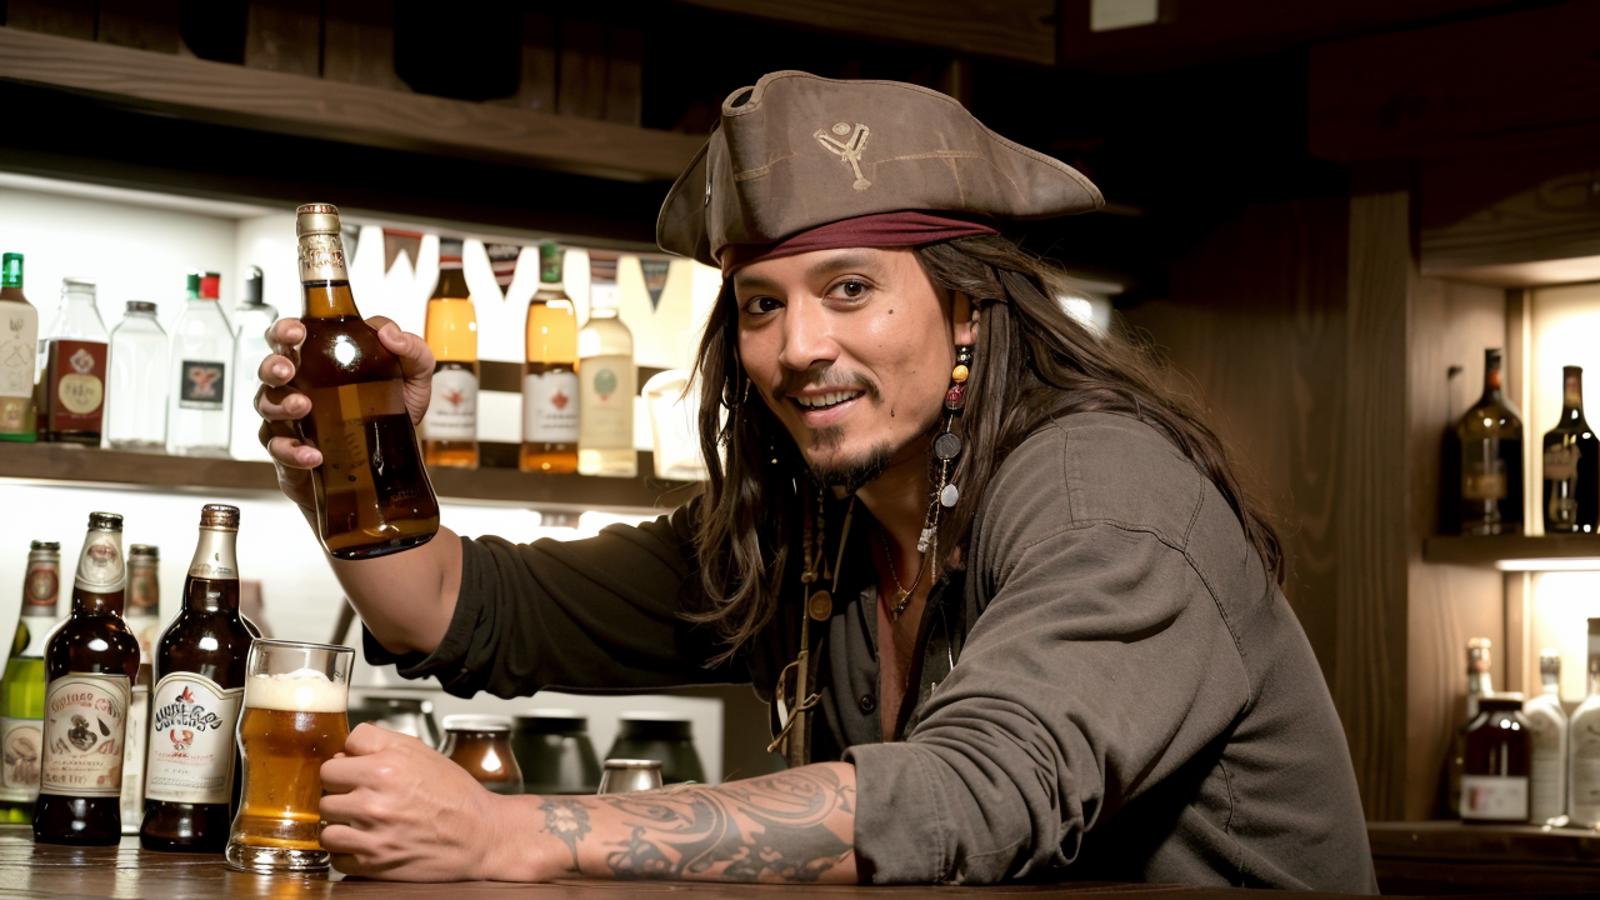 Jack Sparrow - Realistic + Anime - LoRA + Guide image by Vivat